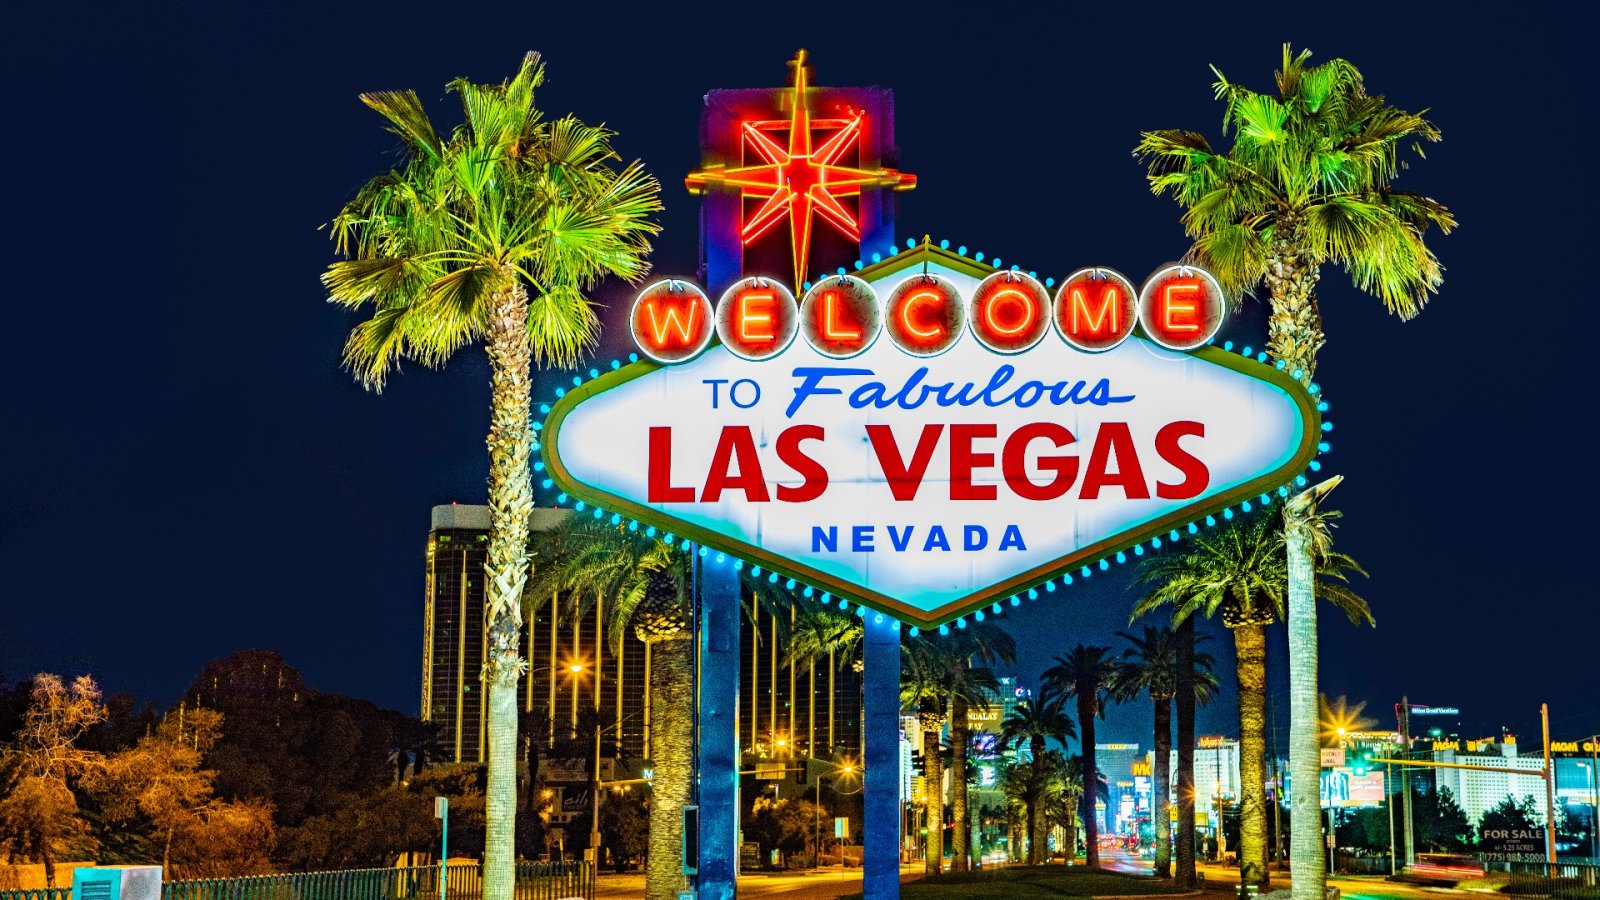 6 golden rules, tips & tricks when planning your trip to Las Vegas